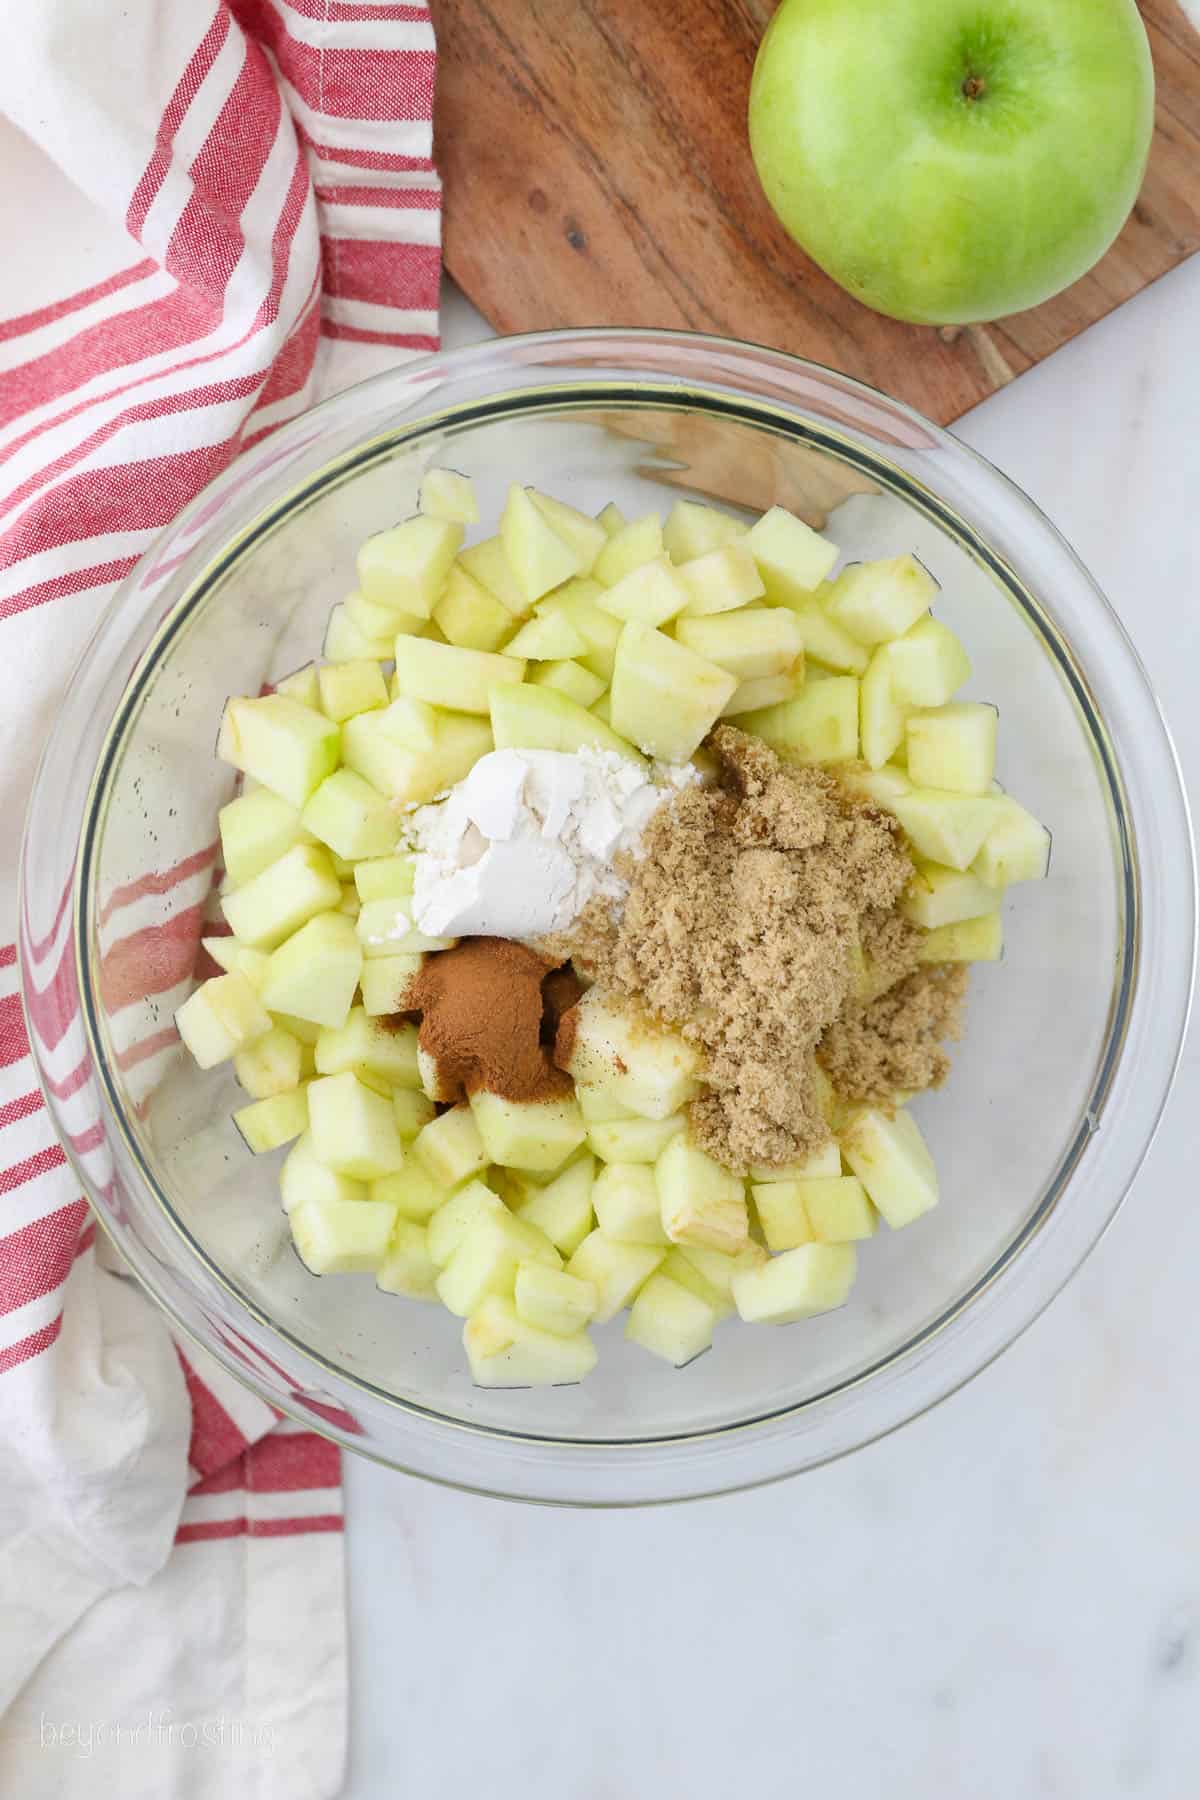 Flour and spices added to a glass bowl with diced apples for apple pie filling.